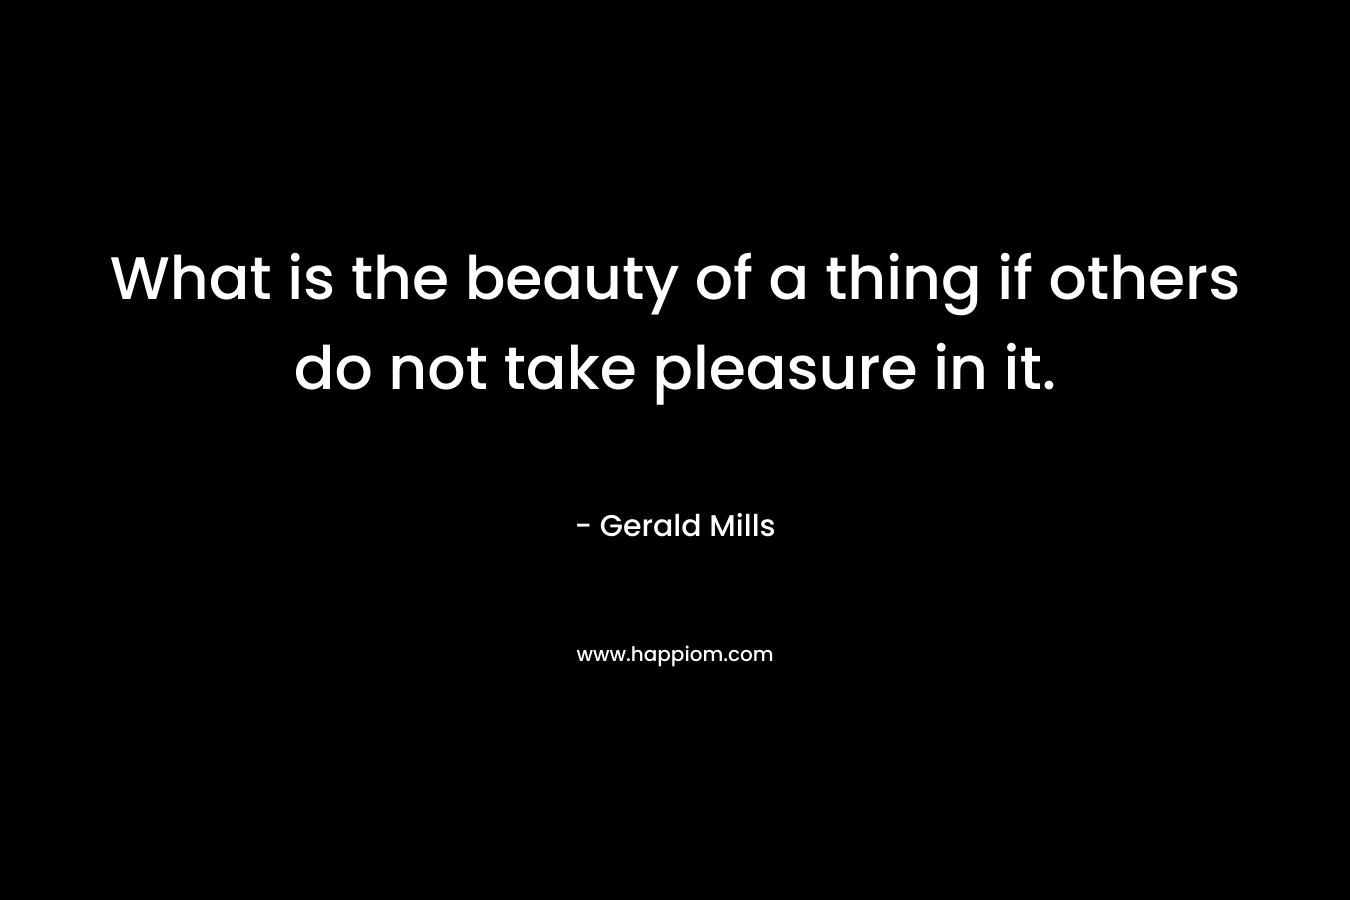 What is the beauty of a thing if others do not take pleasure in it.